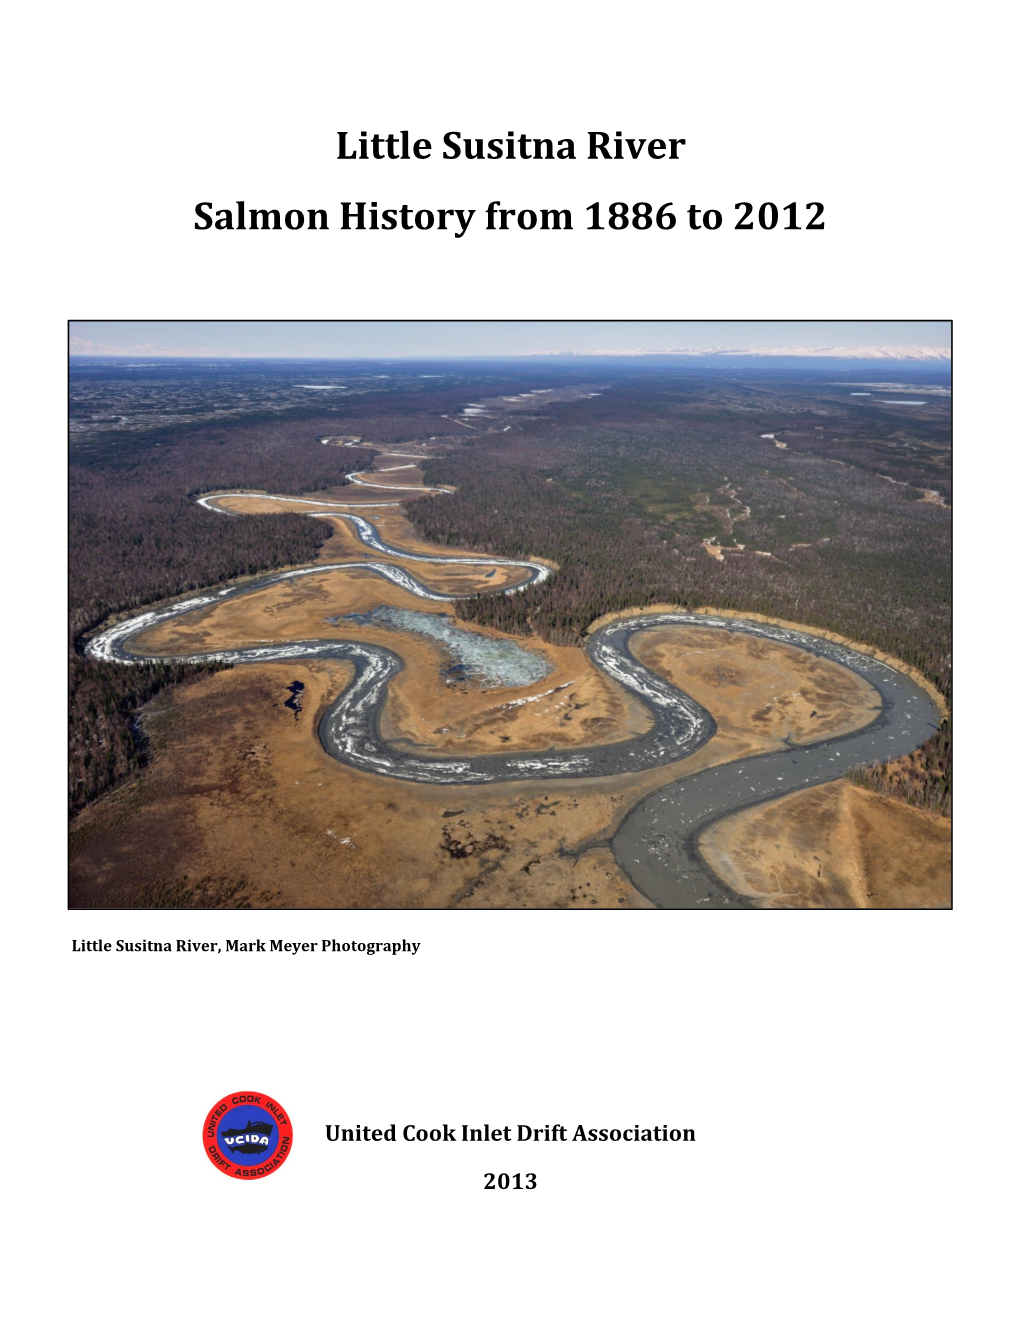 Little Susitna River Salmon History from 1886 to 2012